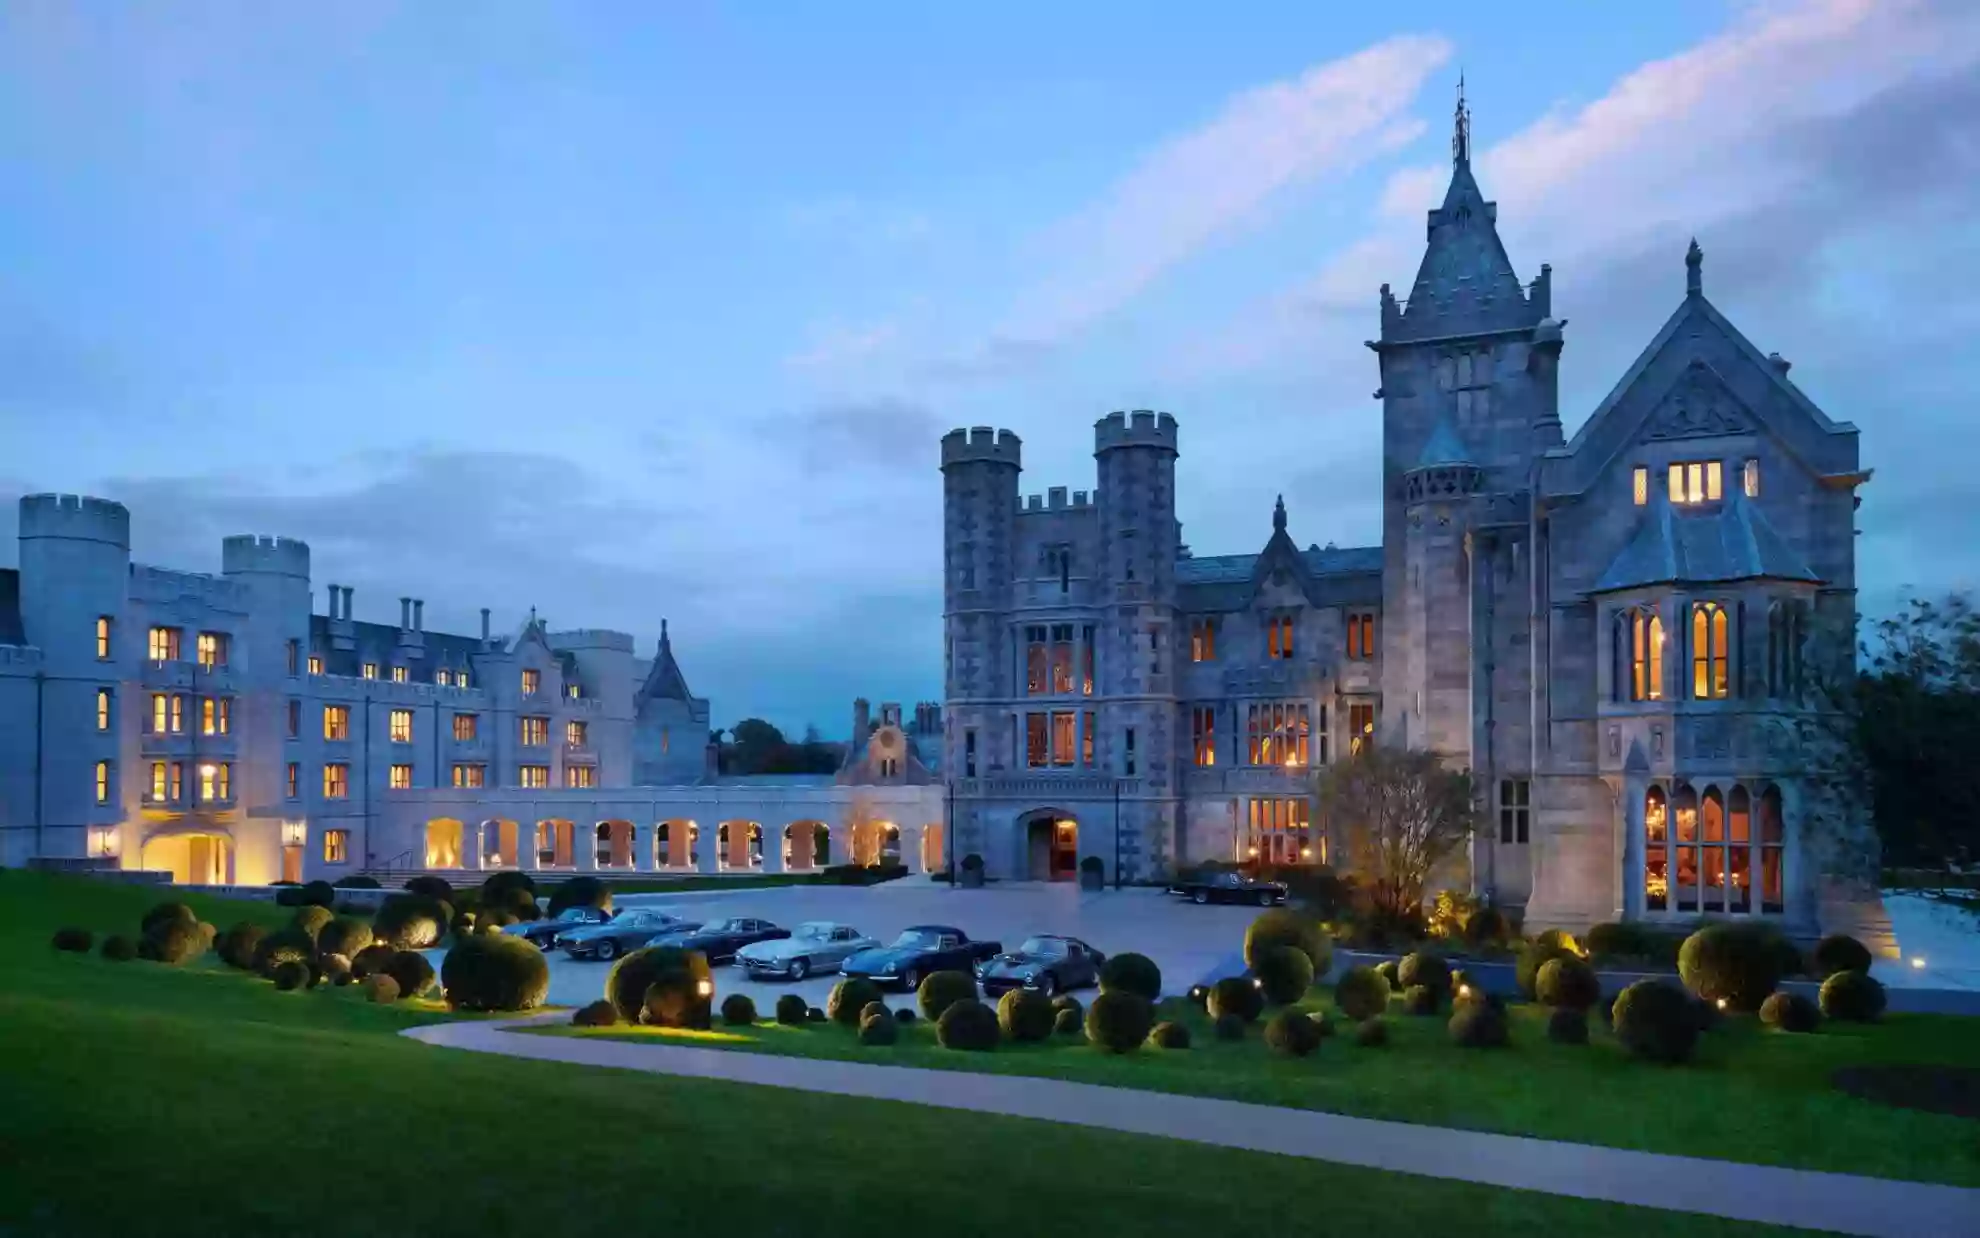 The Carriage House at Adare Manor